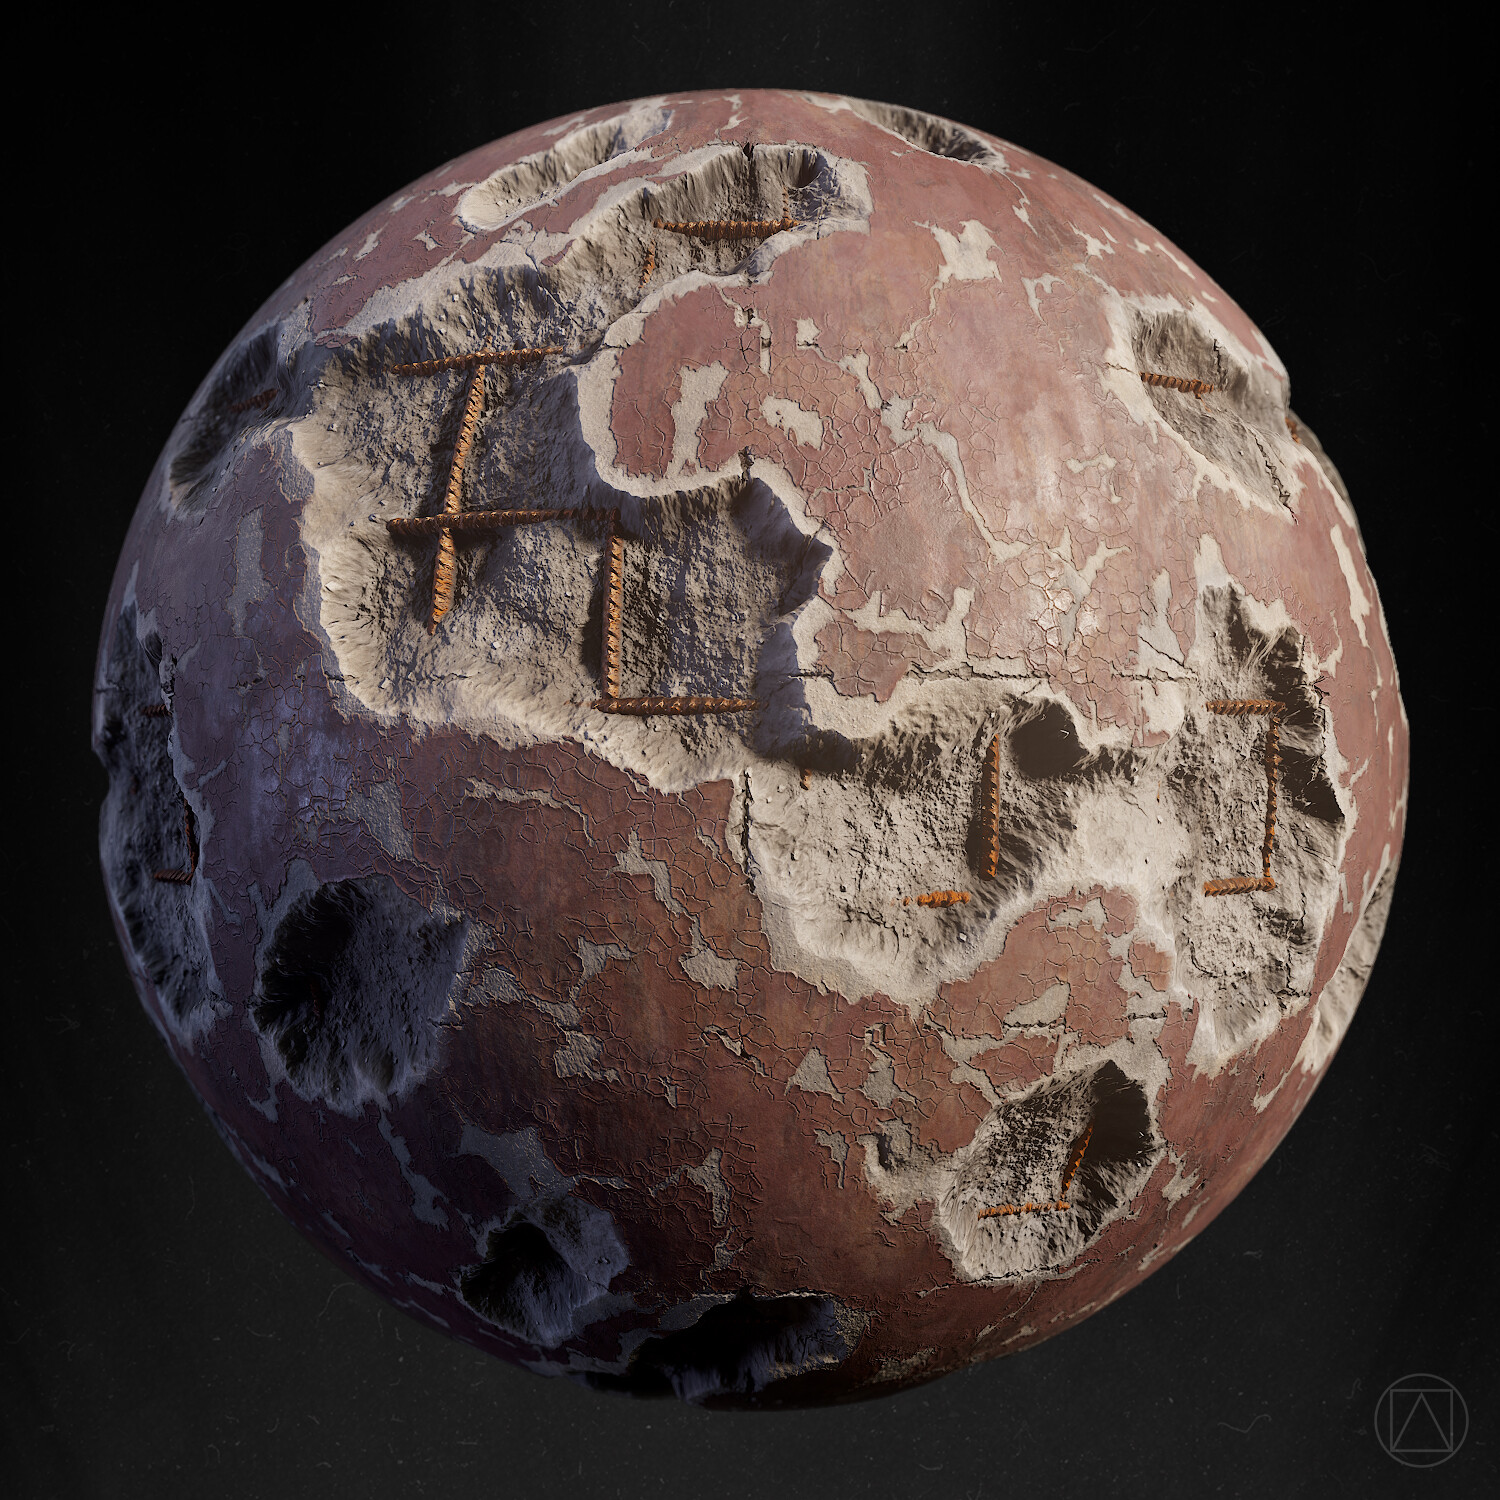 100% Substance Designer, rendered in Marmoset Toolbag 4 with RTX.